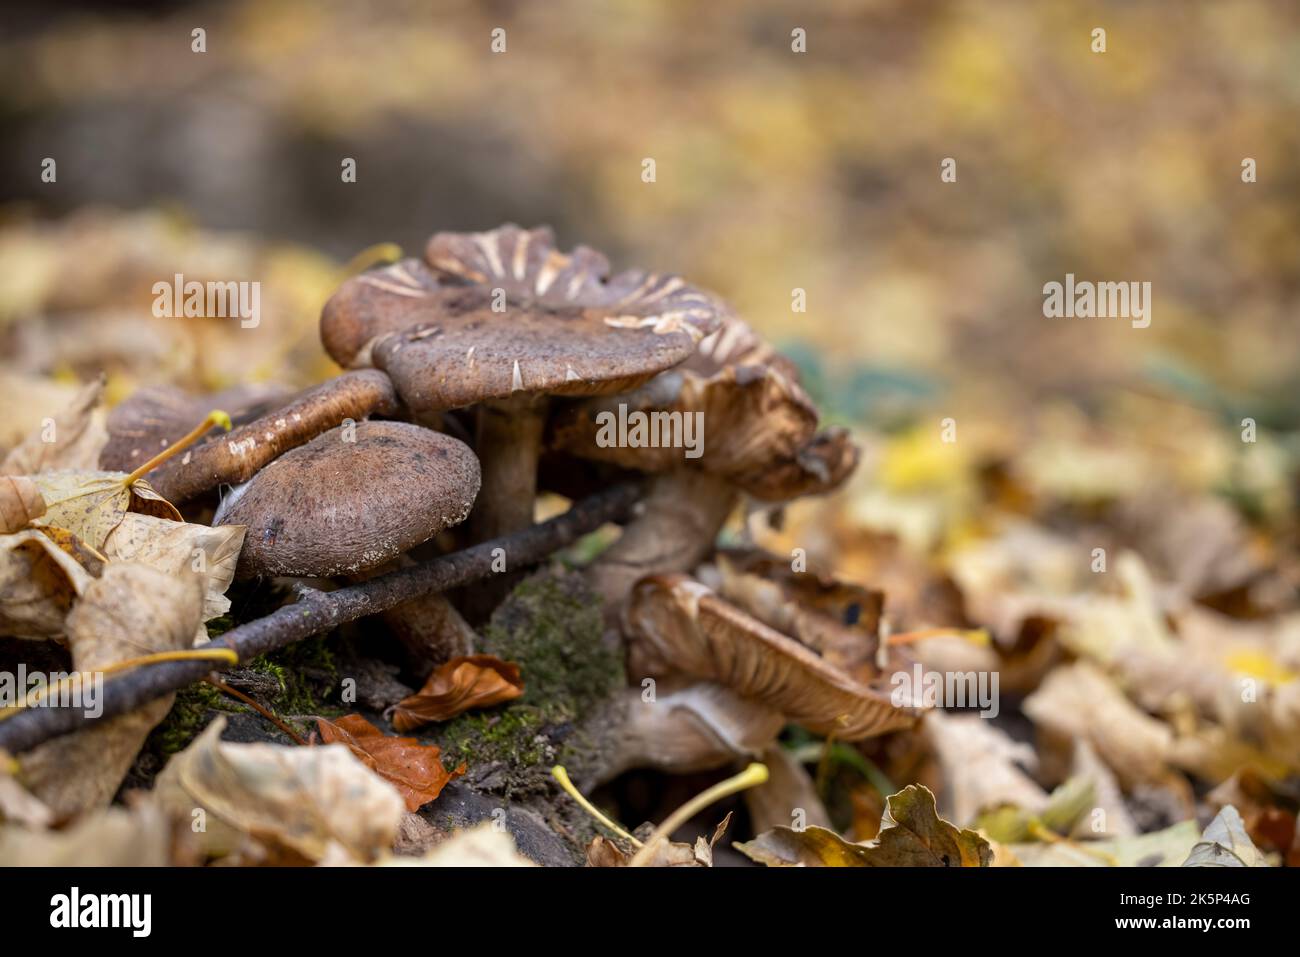 Mushrooms in the forest in autumn, Abruzzo, Italy. Stock Photo